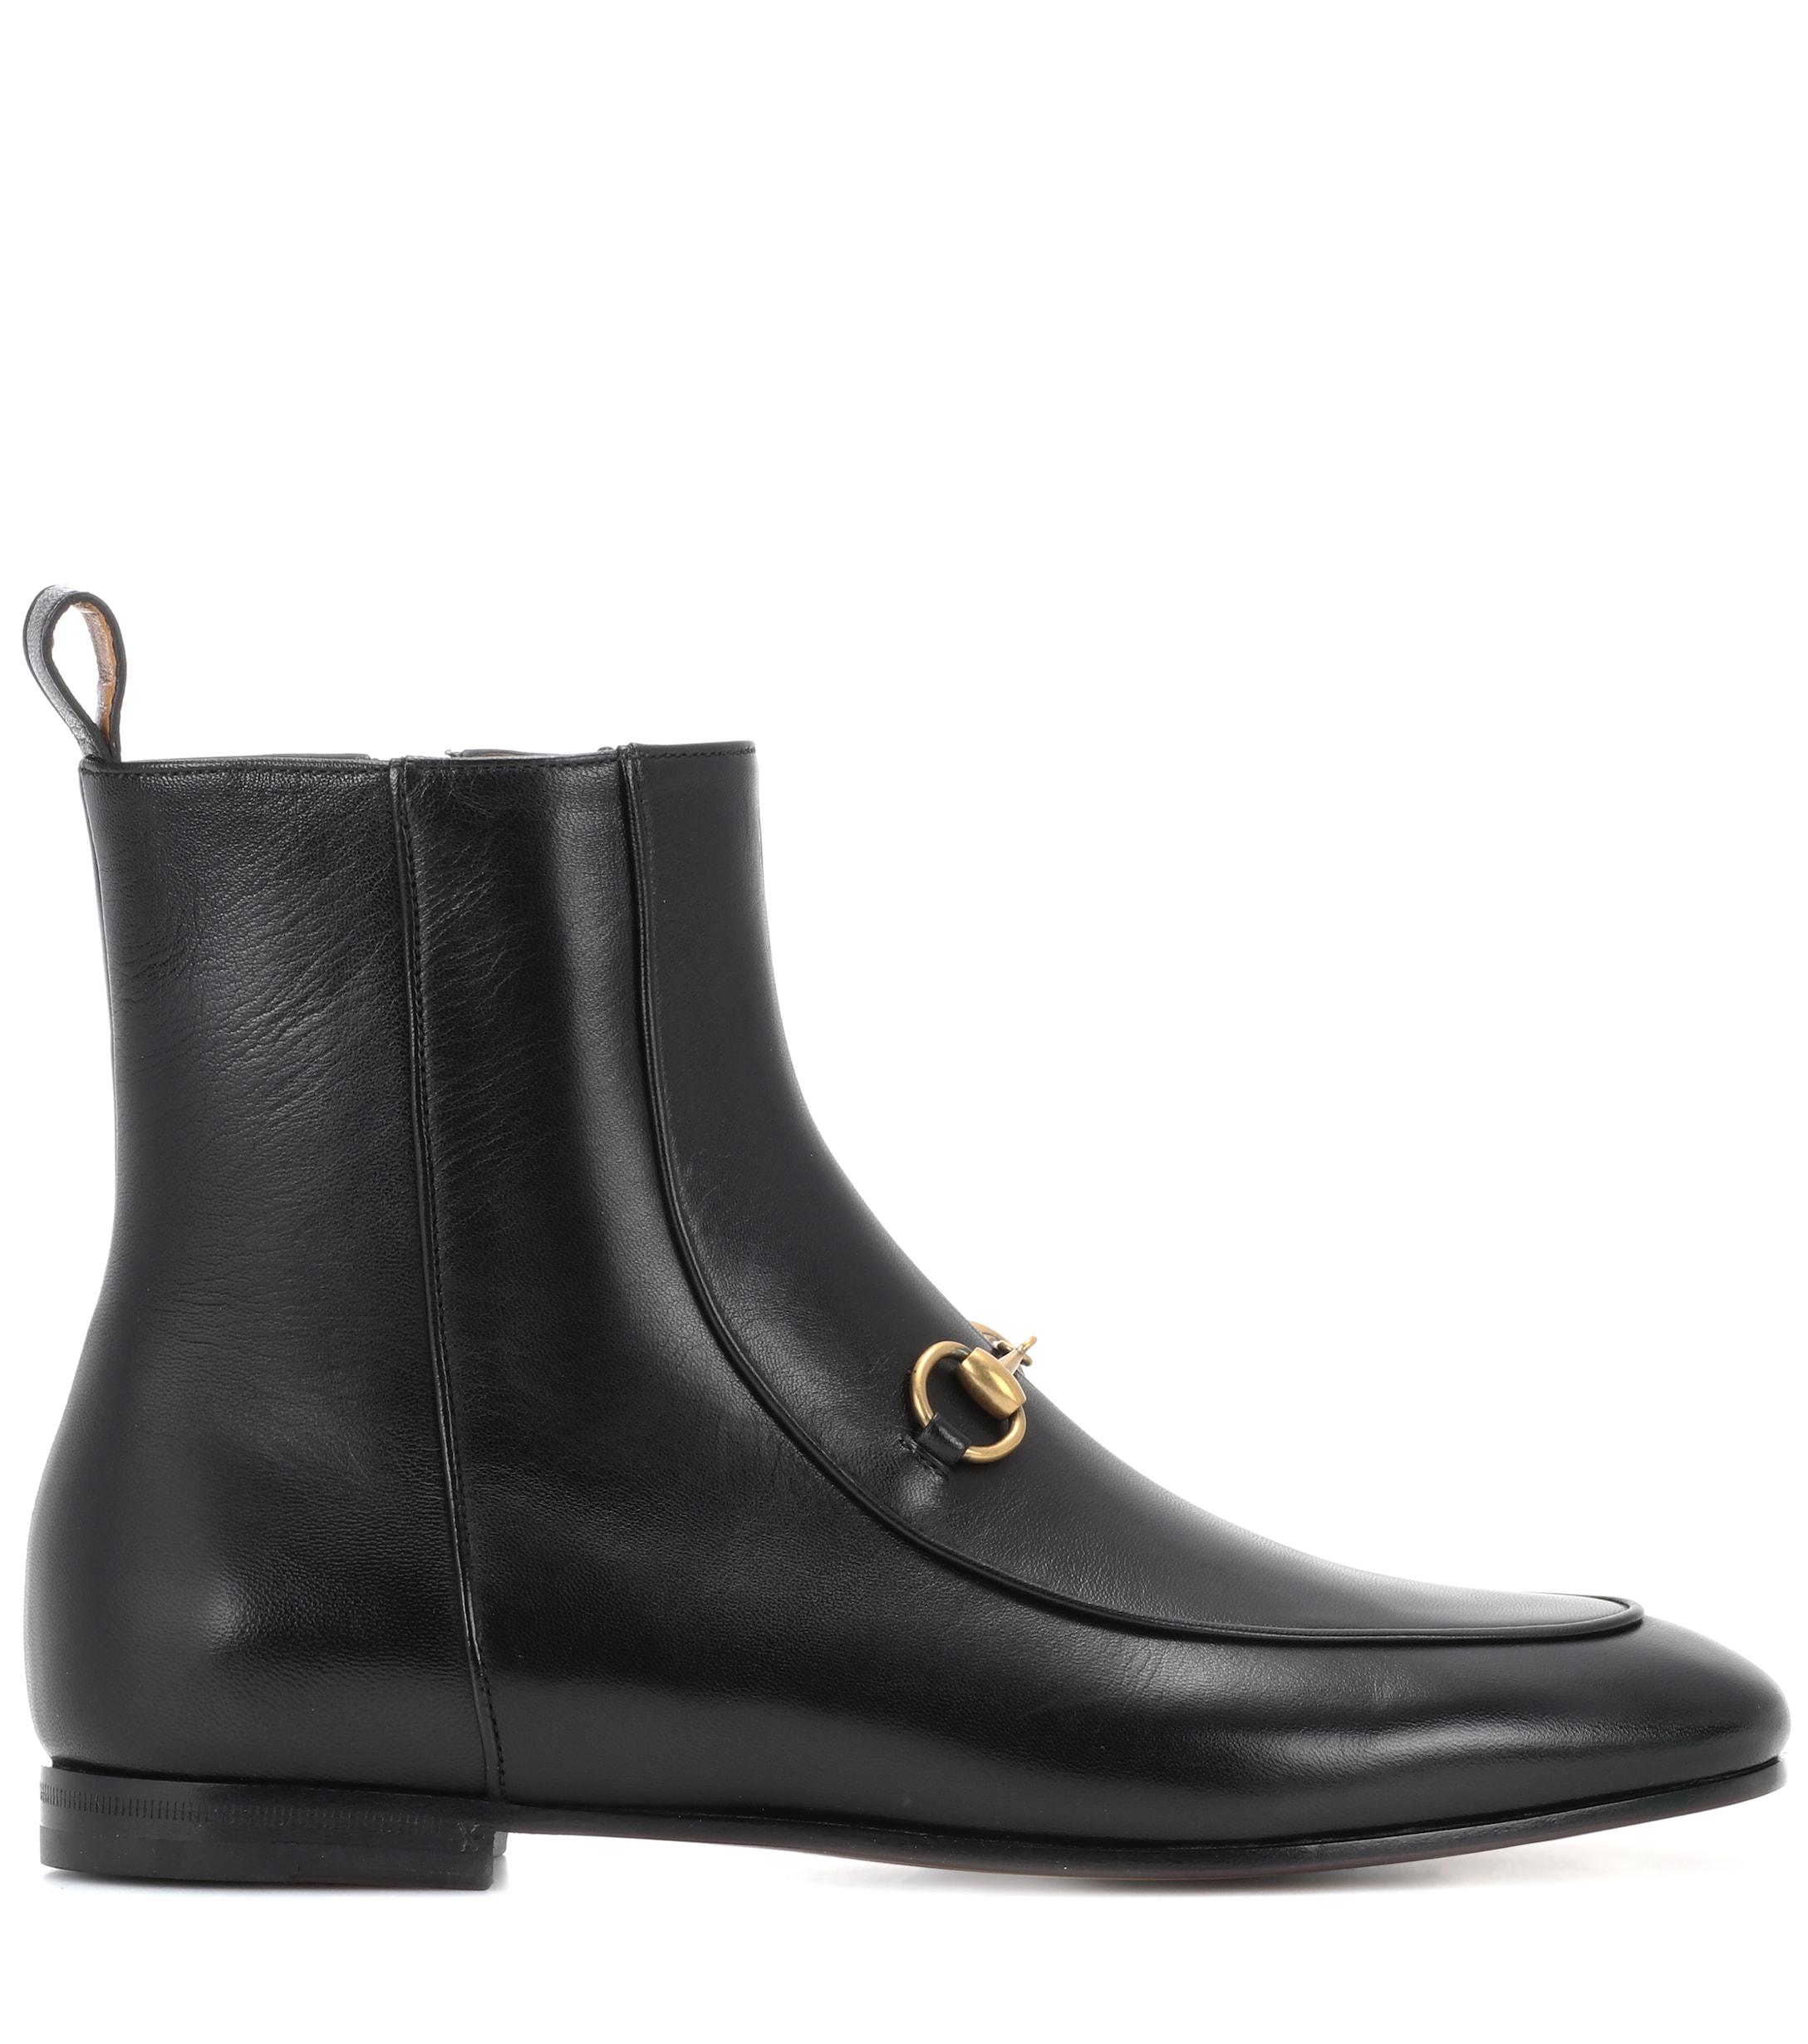 Gucci Jordaan Leather Ankle Boots in Black - Lyst